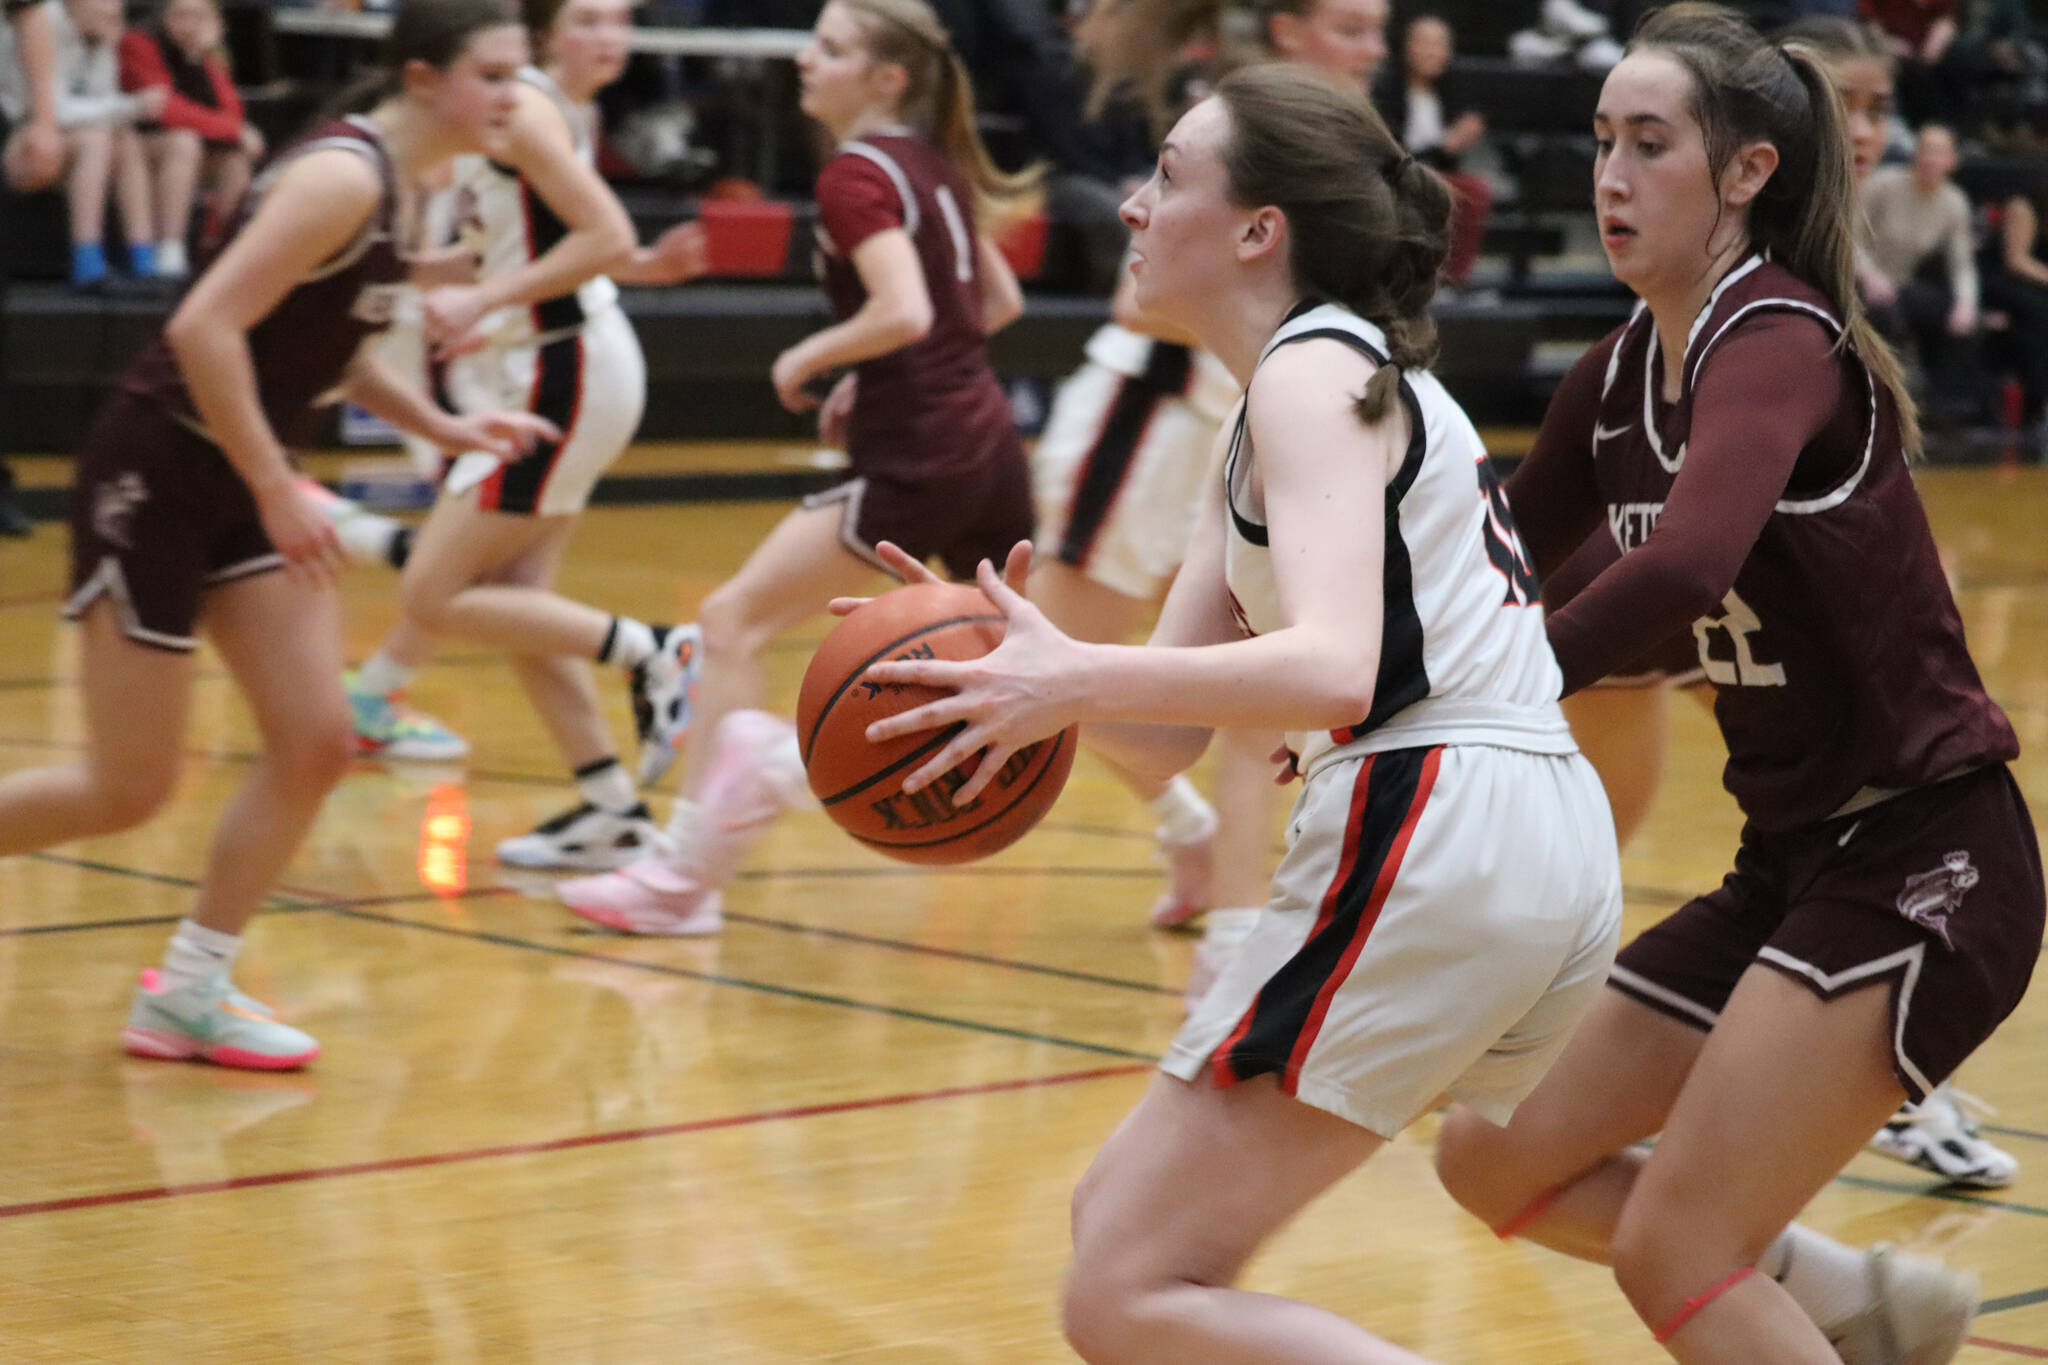 JDHS junior Chloe Casperson takes the ball down court for a layup on Saturday against Ketchikan High School. Casperson would finish the game with a total of 5 points. (Jonson Kuhn / Juneau Empire)